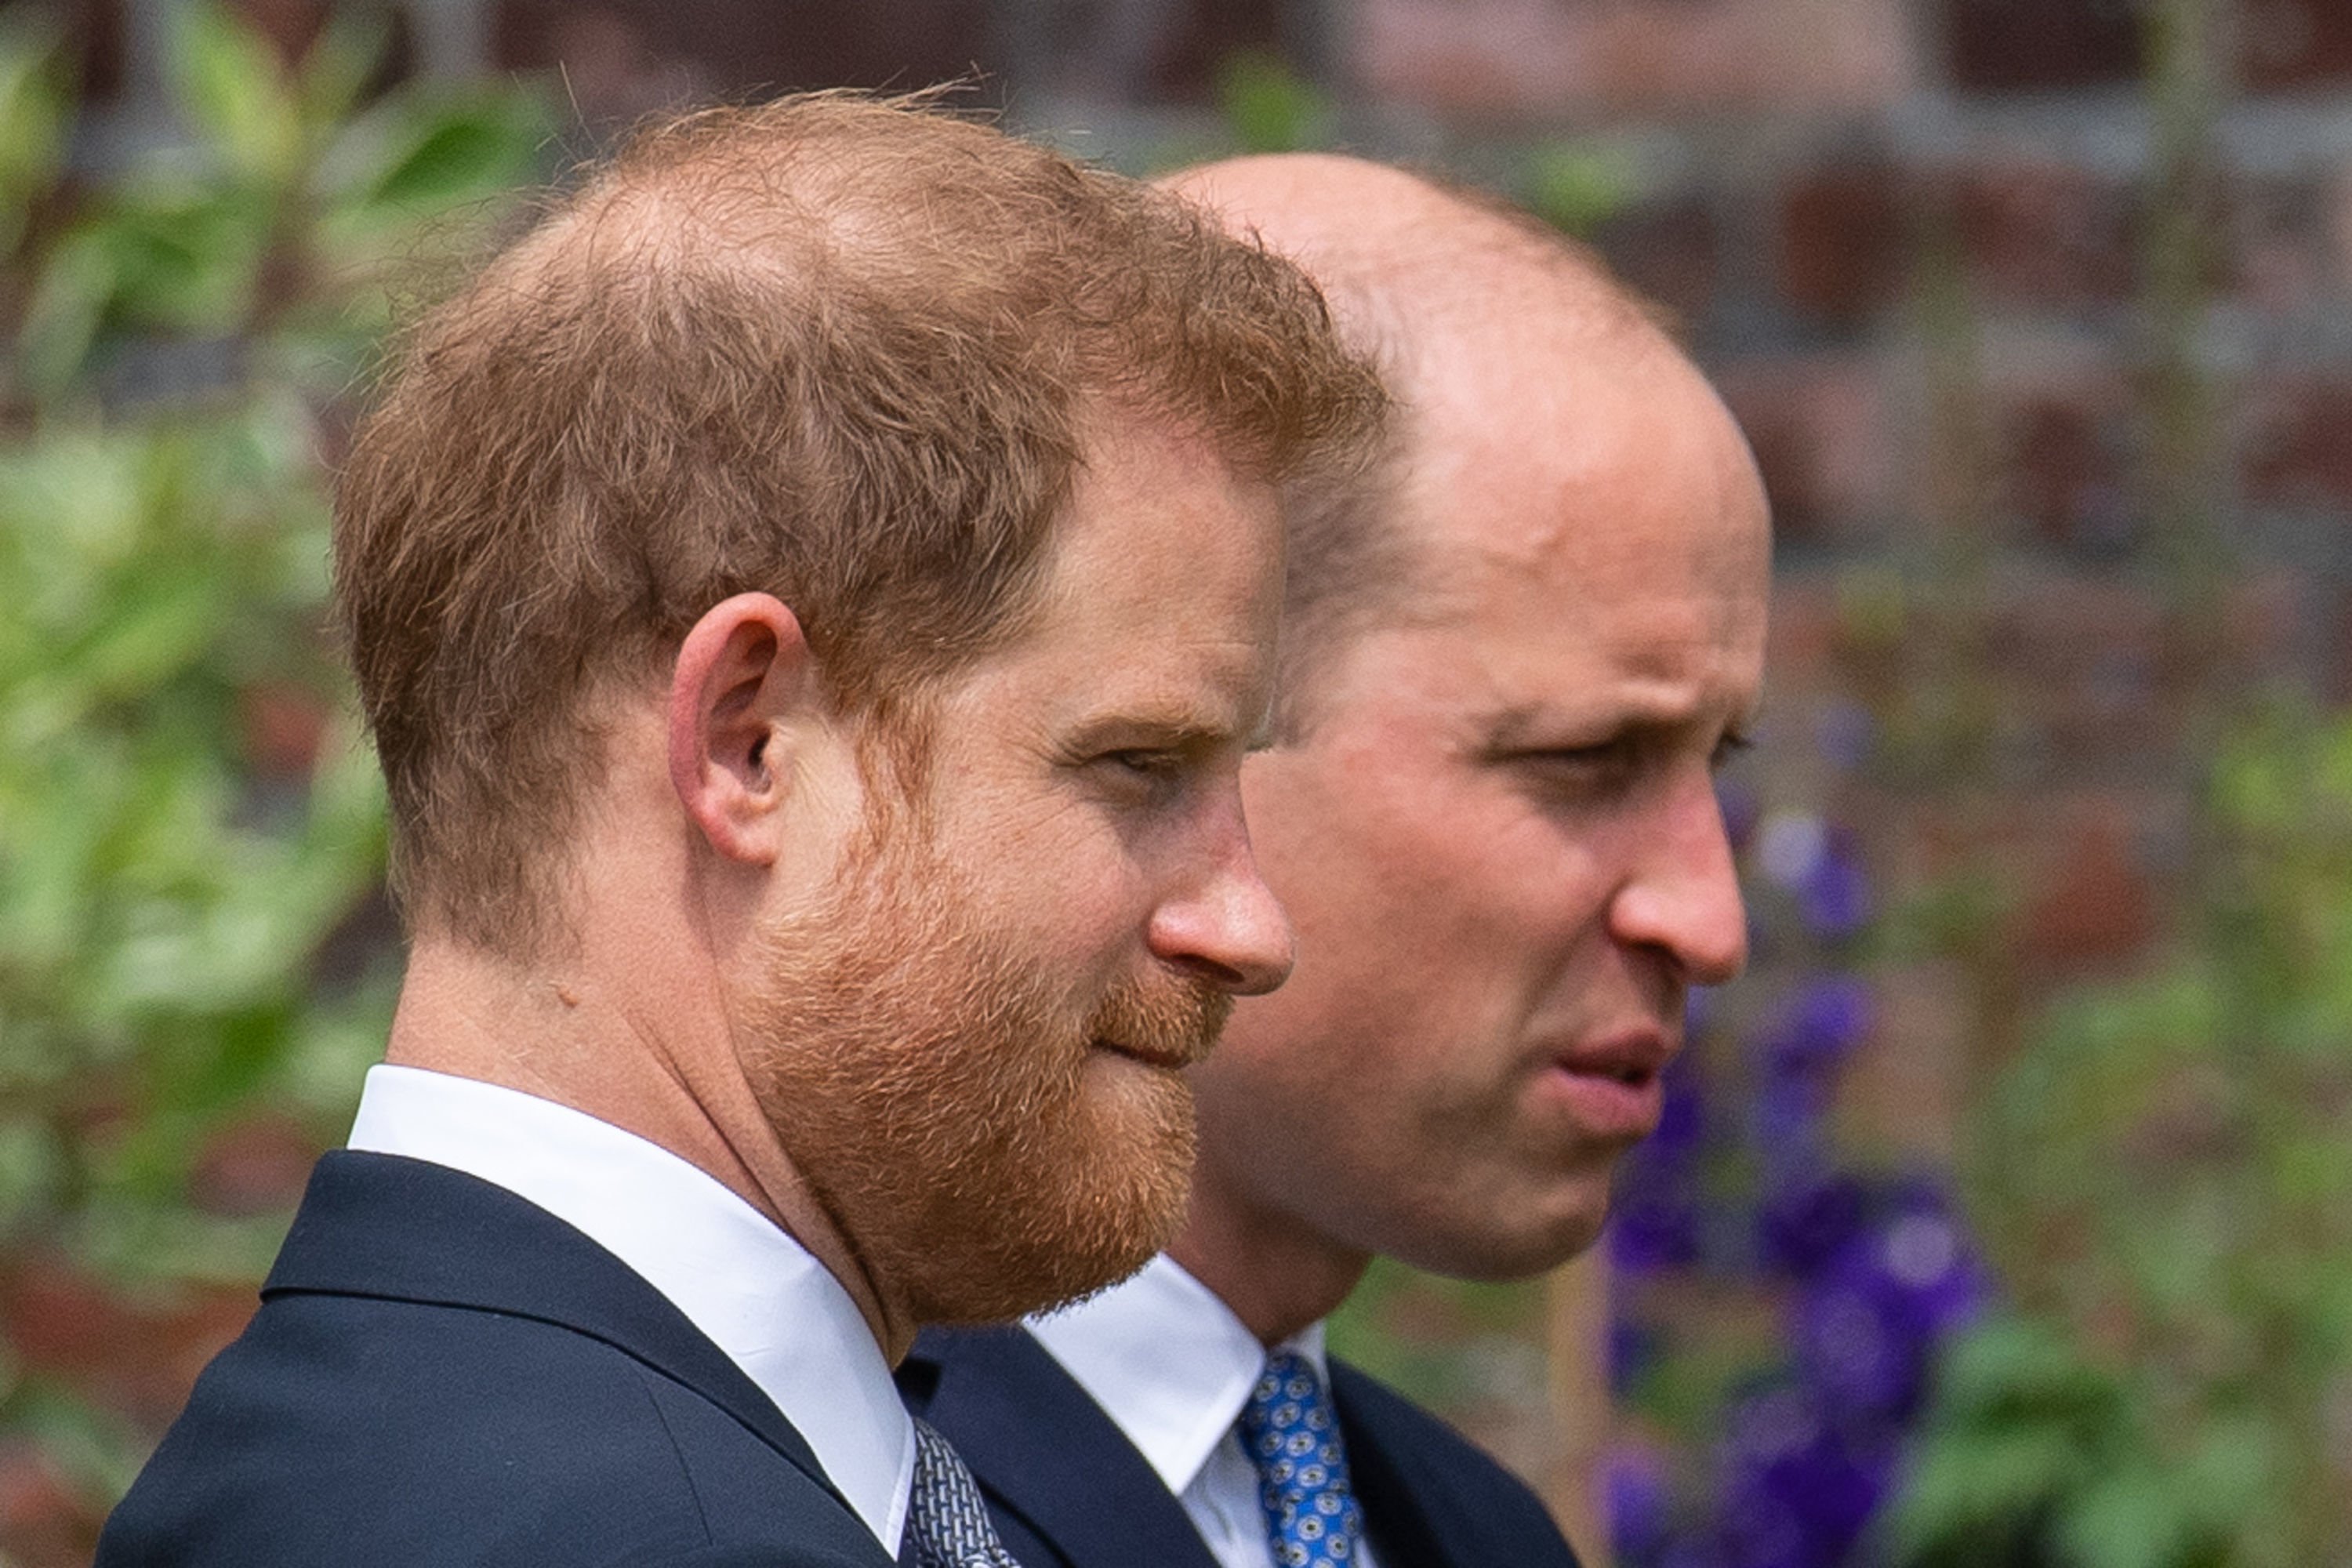 Prince Harry and Prince William during the unveiling of a statue of their mother, Princess Diana, at Kensington Palace, on July 1, 2021, in London, England. | Source: Getty Images